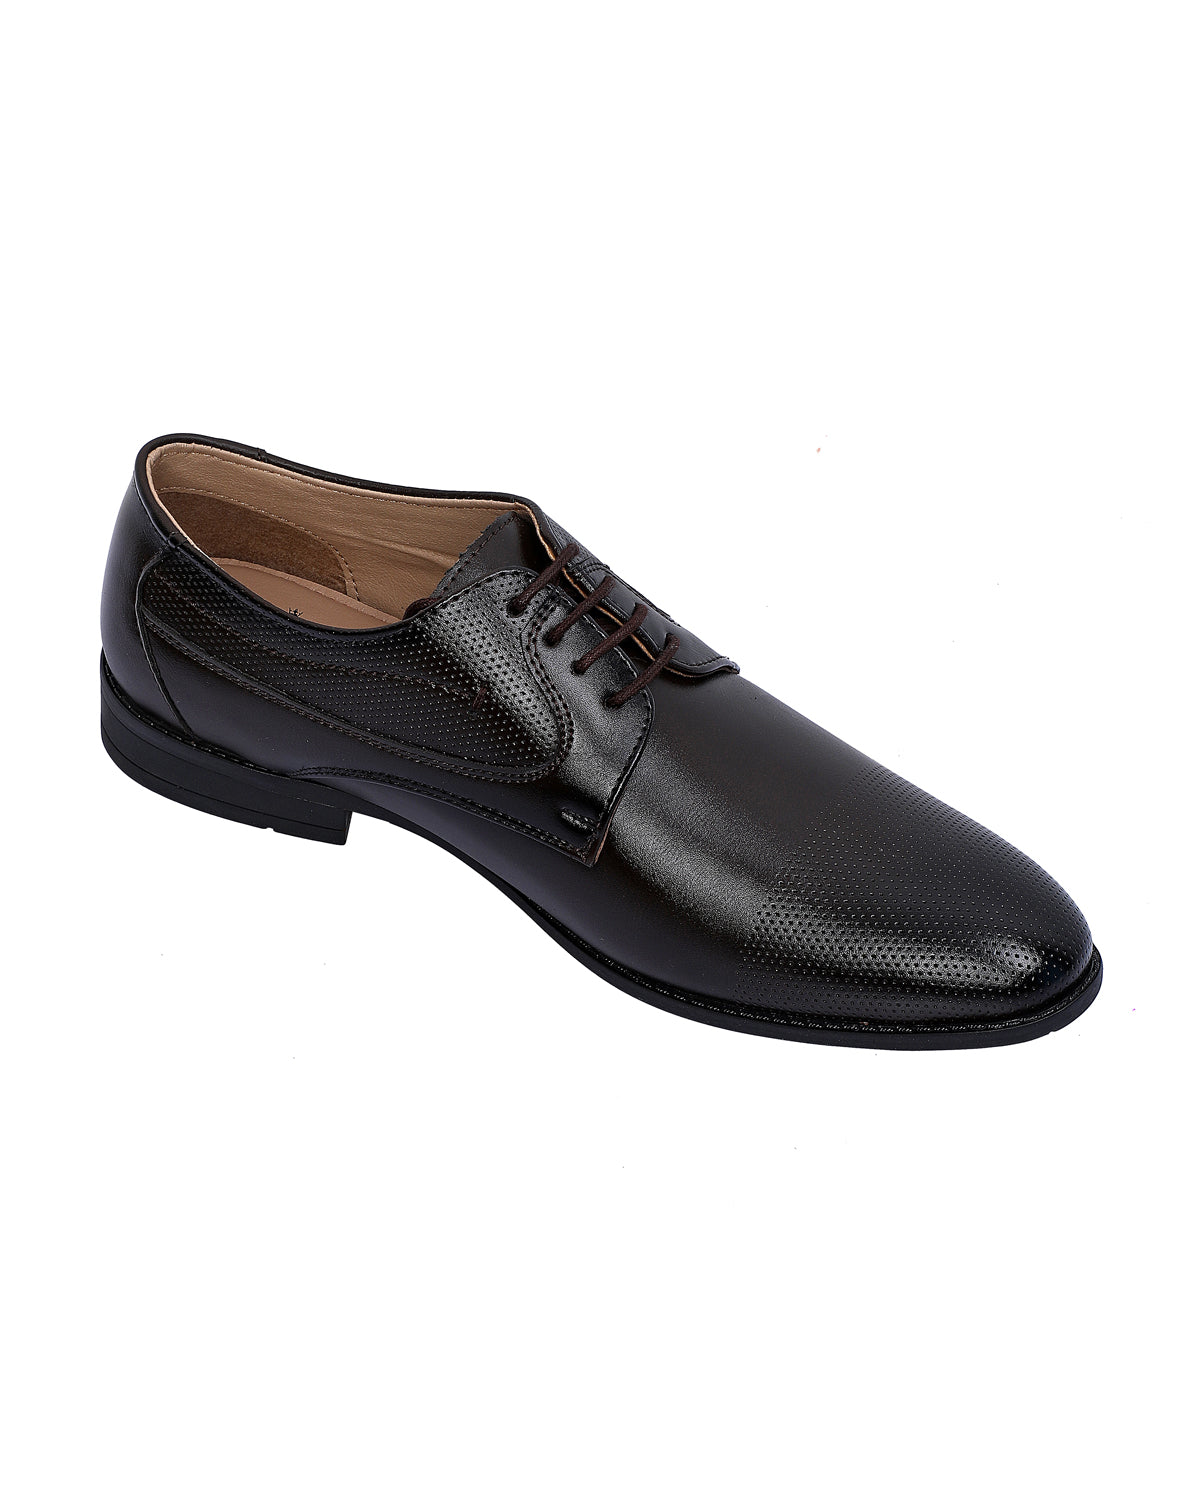 Leather Oxford Shoes Round Toe - Black